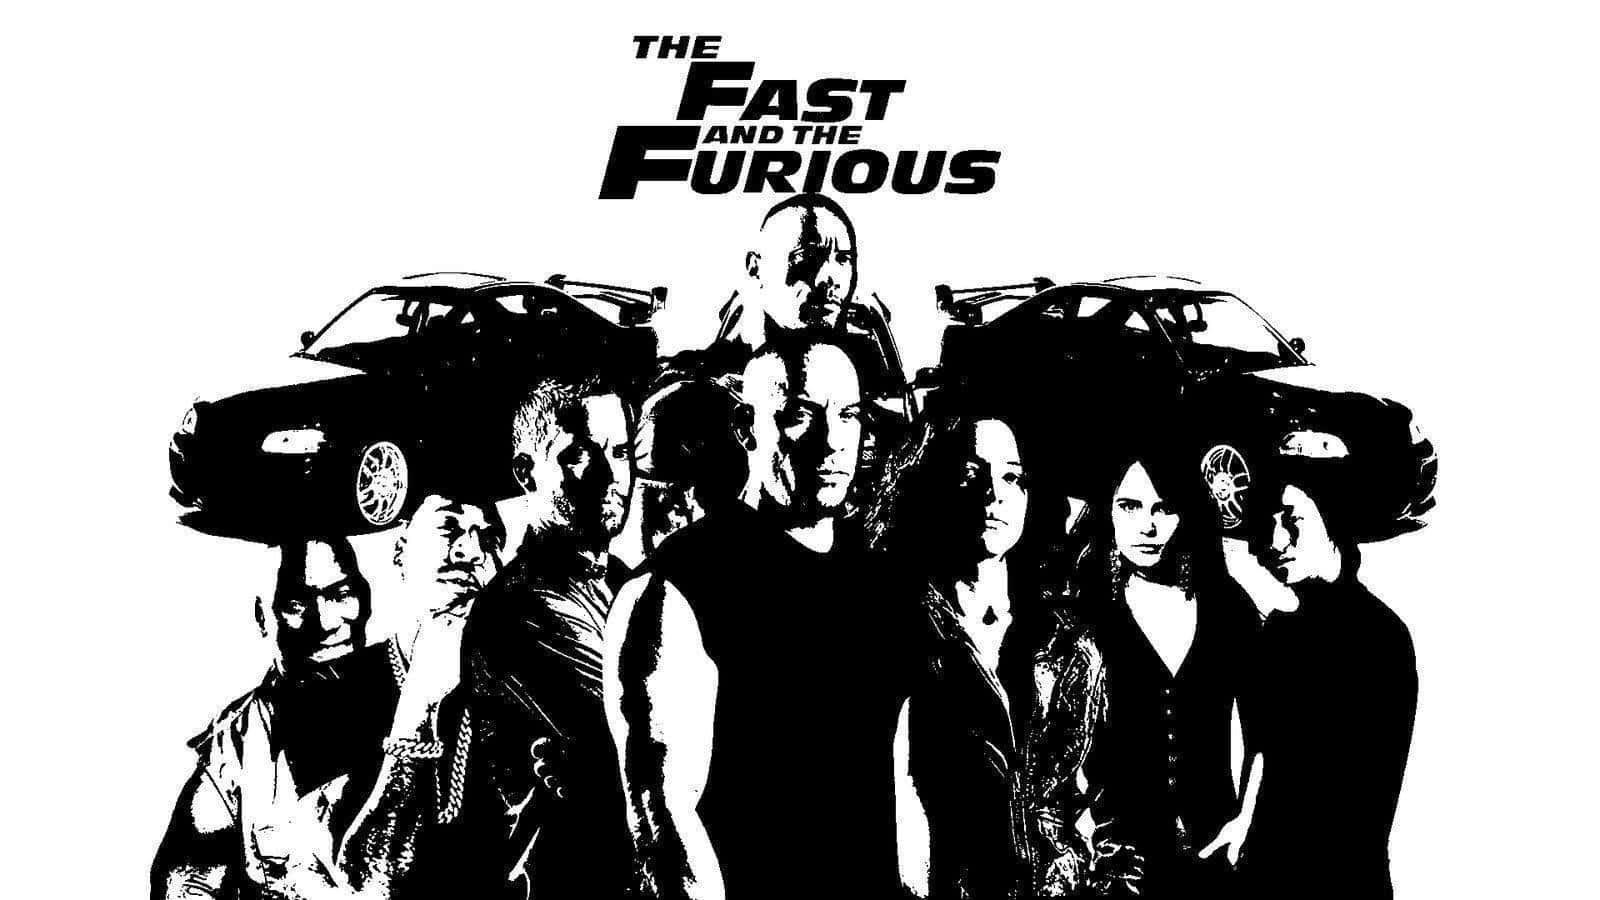 "We Race As One – Fast and Furious"